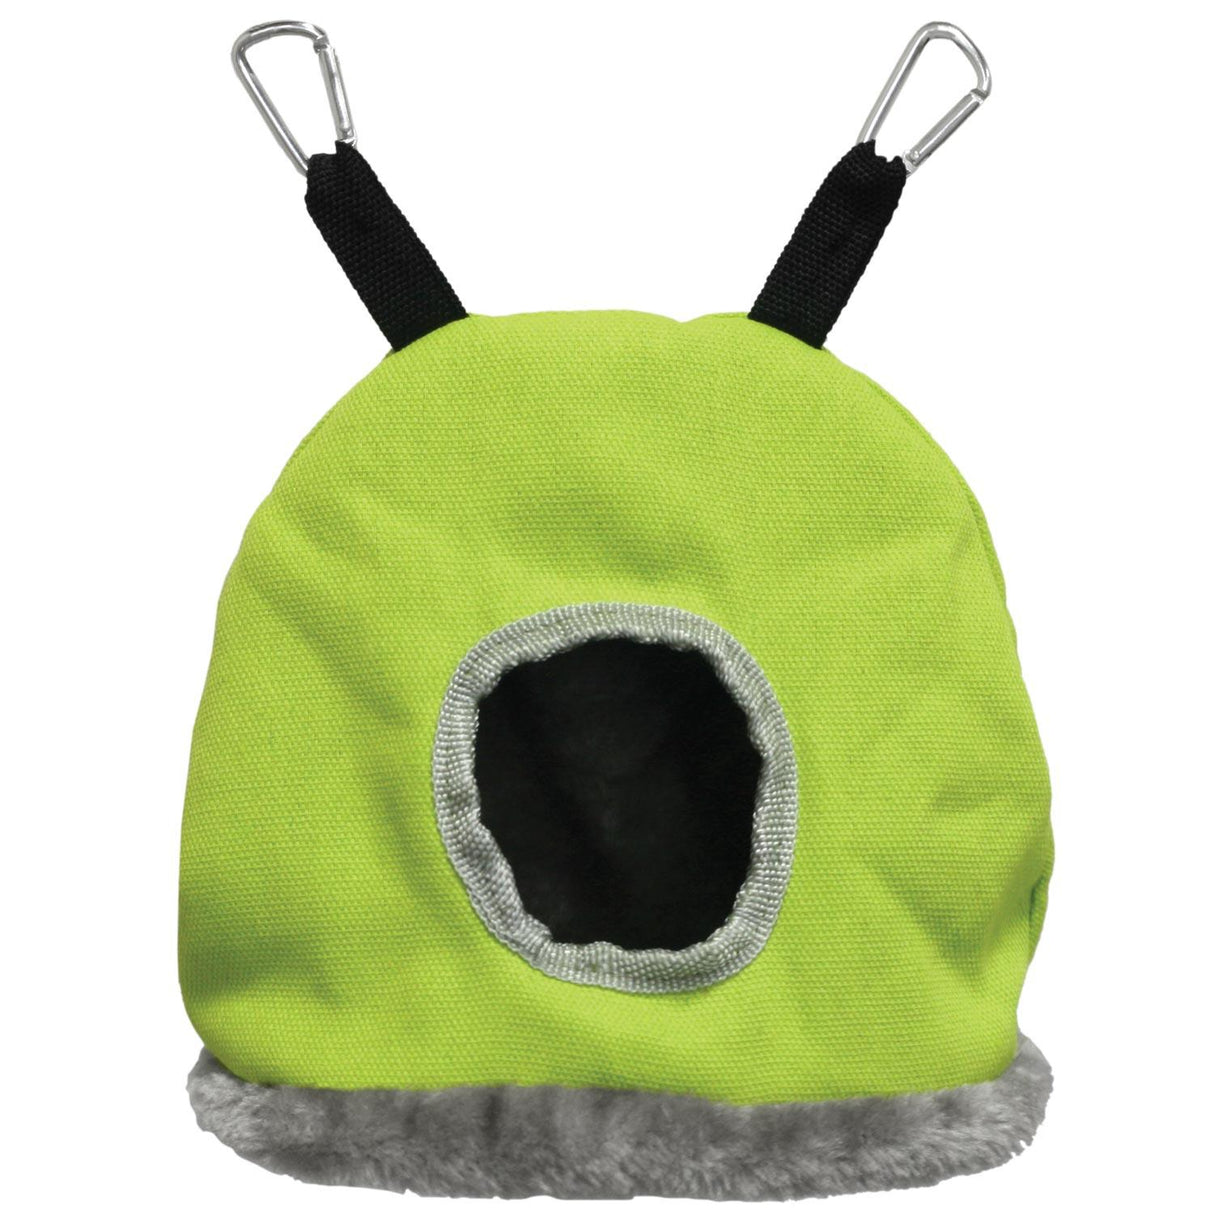 6 count Prevue Snuggle Sack Medium Bird Shelter for Sleeping, Playing and Hiding